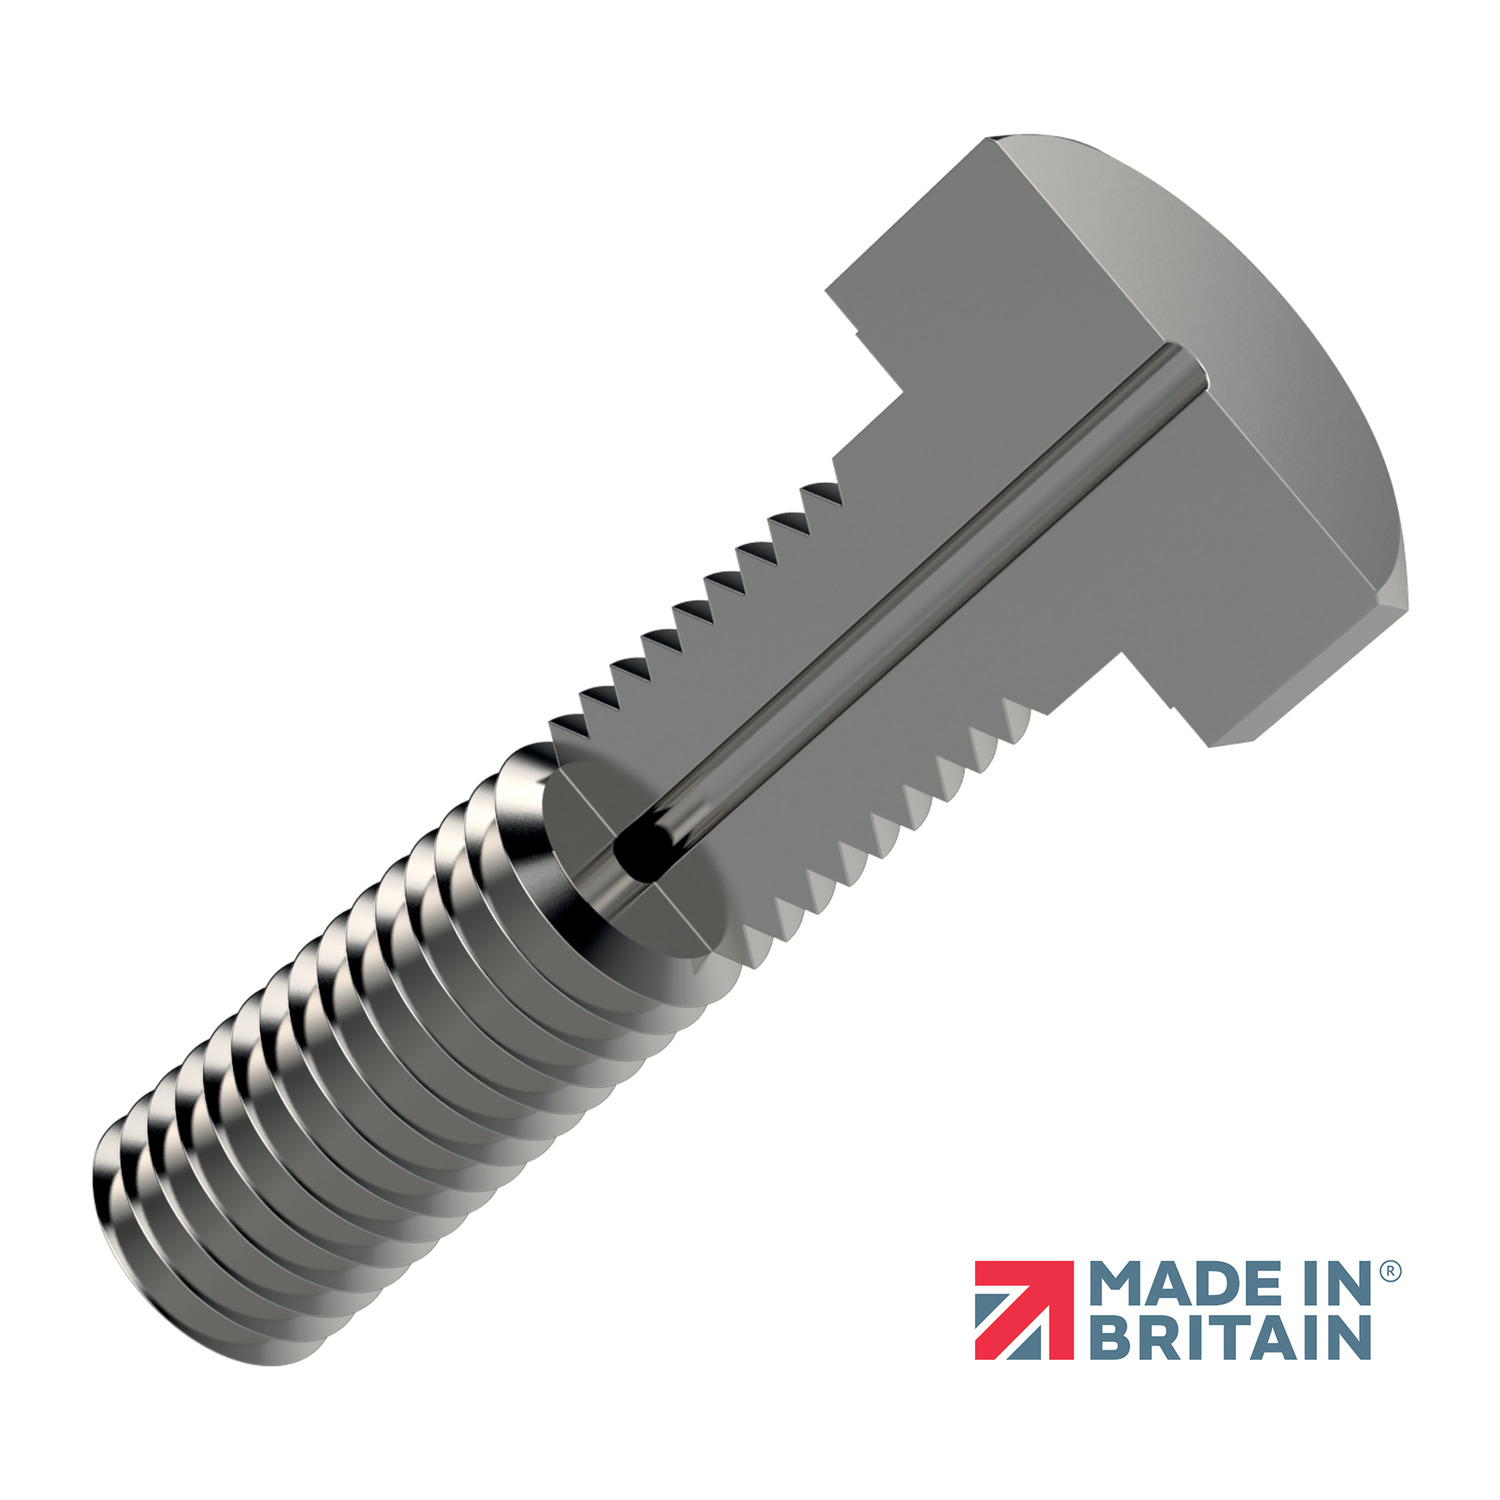 Vented Screws - Hex. Head Hex head vented screws to DIN 933. Availble in AISI 303 and 316 series stainless steel (P0091.A4).